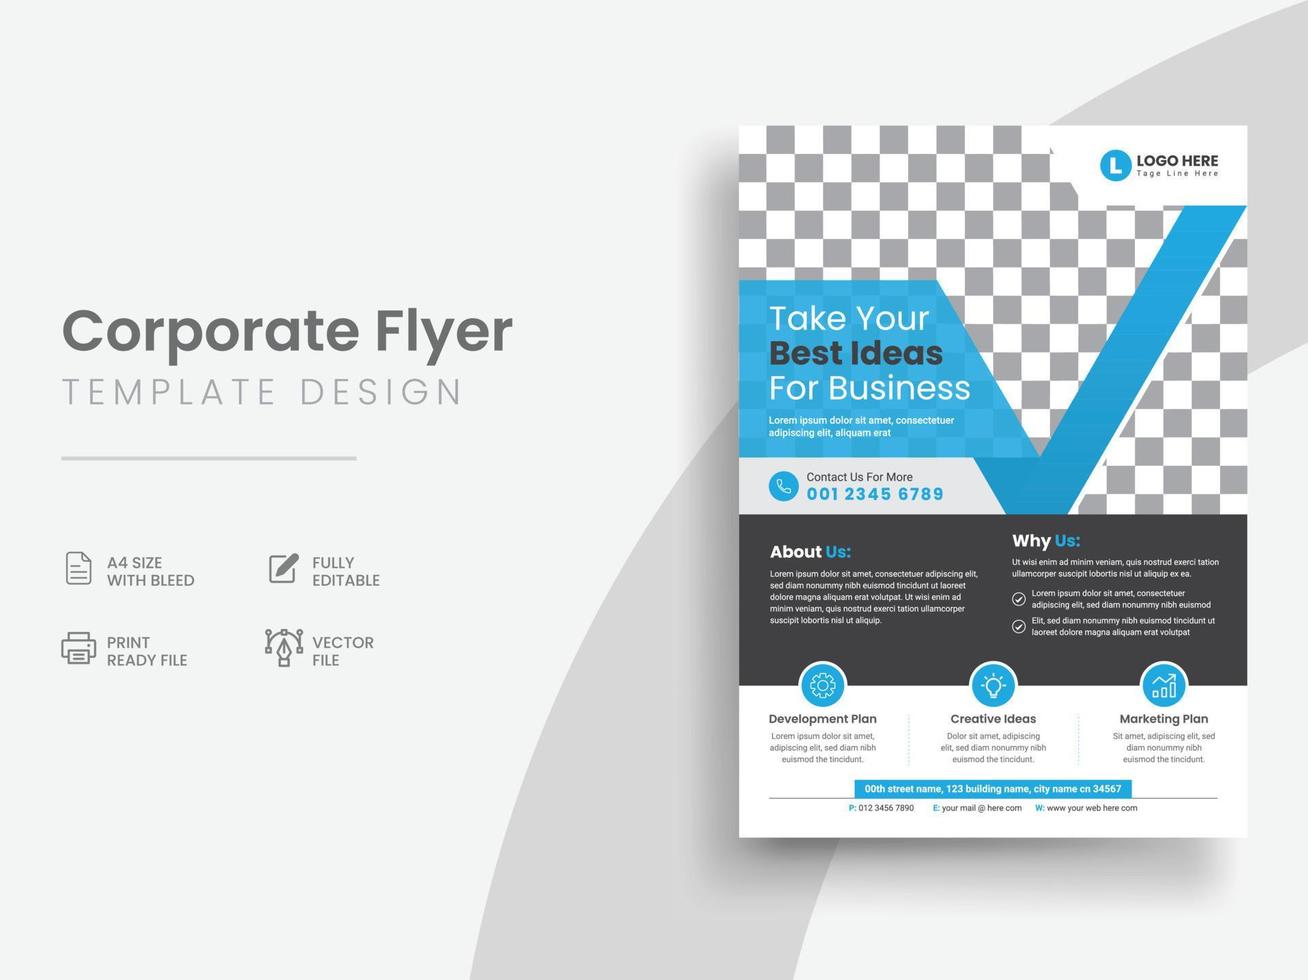 Minimal Corporate Flyer and Business Flyers Design Template. Vol - 05 vector